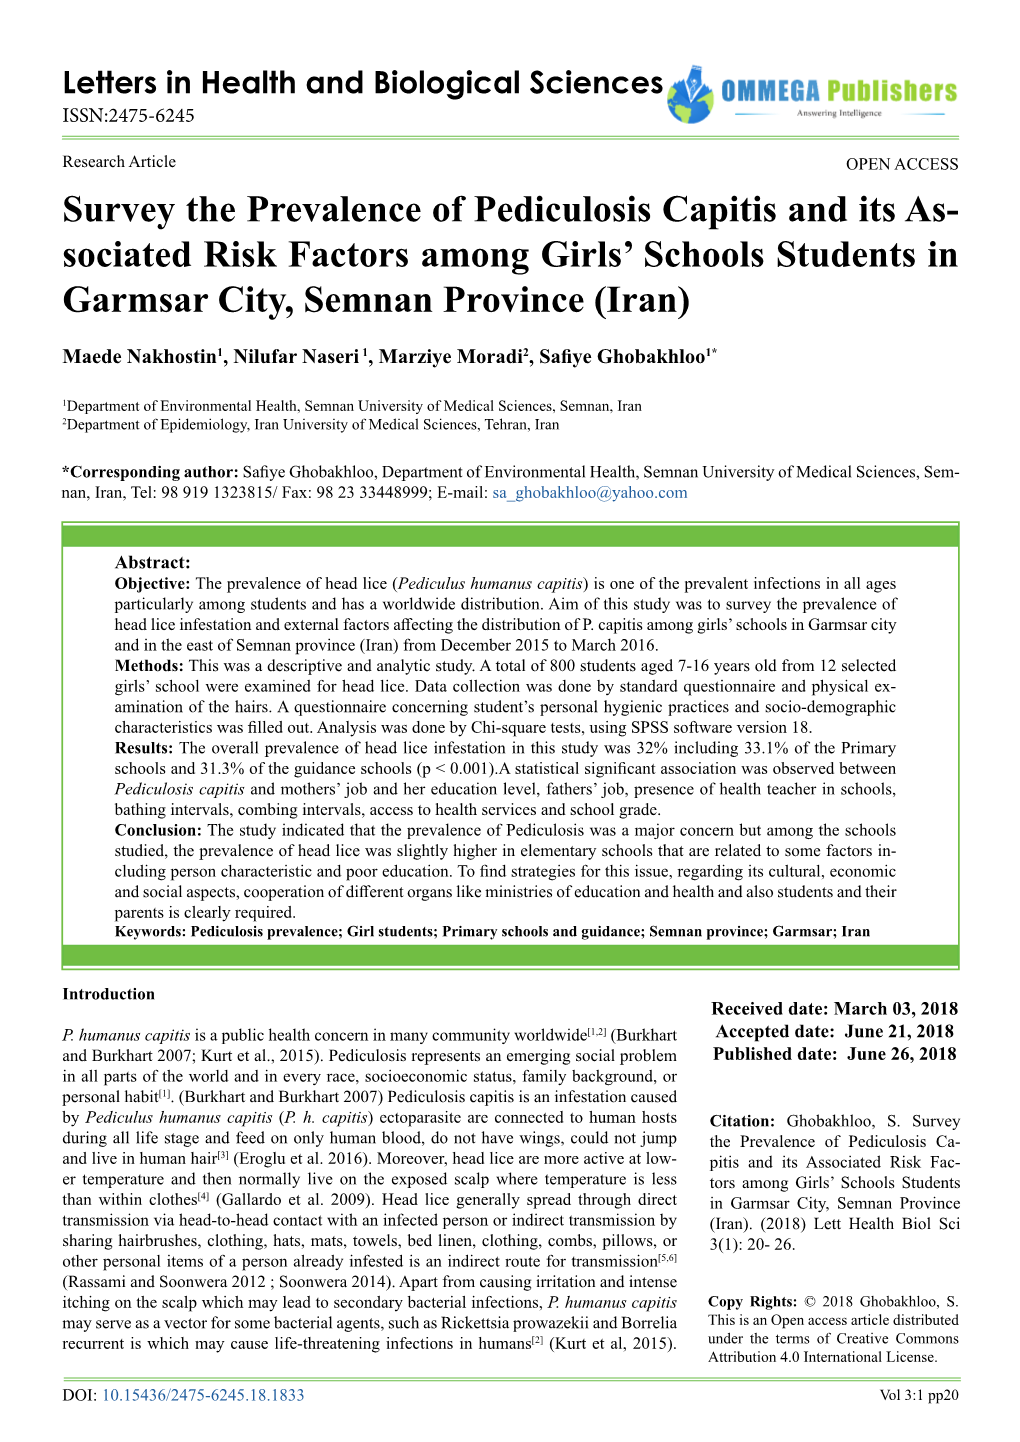 Survey the Prevalence of Pediculosis Capitis and Its As- Sociated Risk Factors Among Girls’ Schools Students in Garmsar City, Semnan Province (Iran)